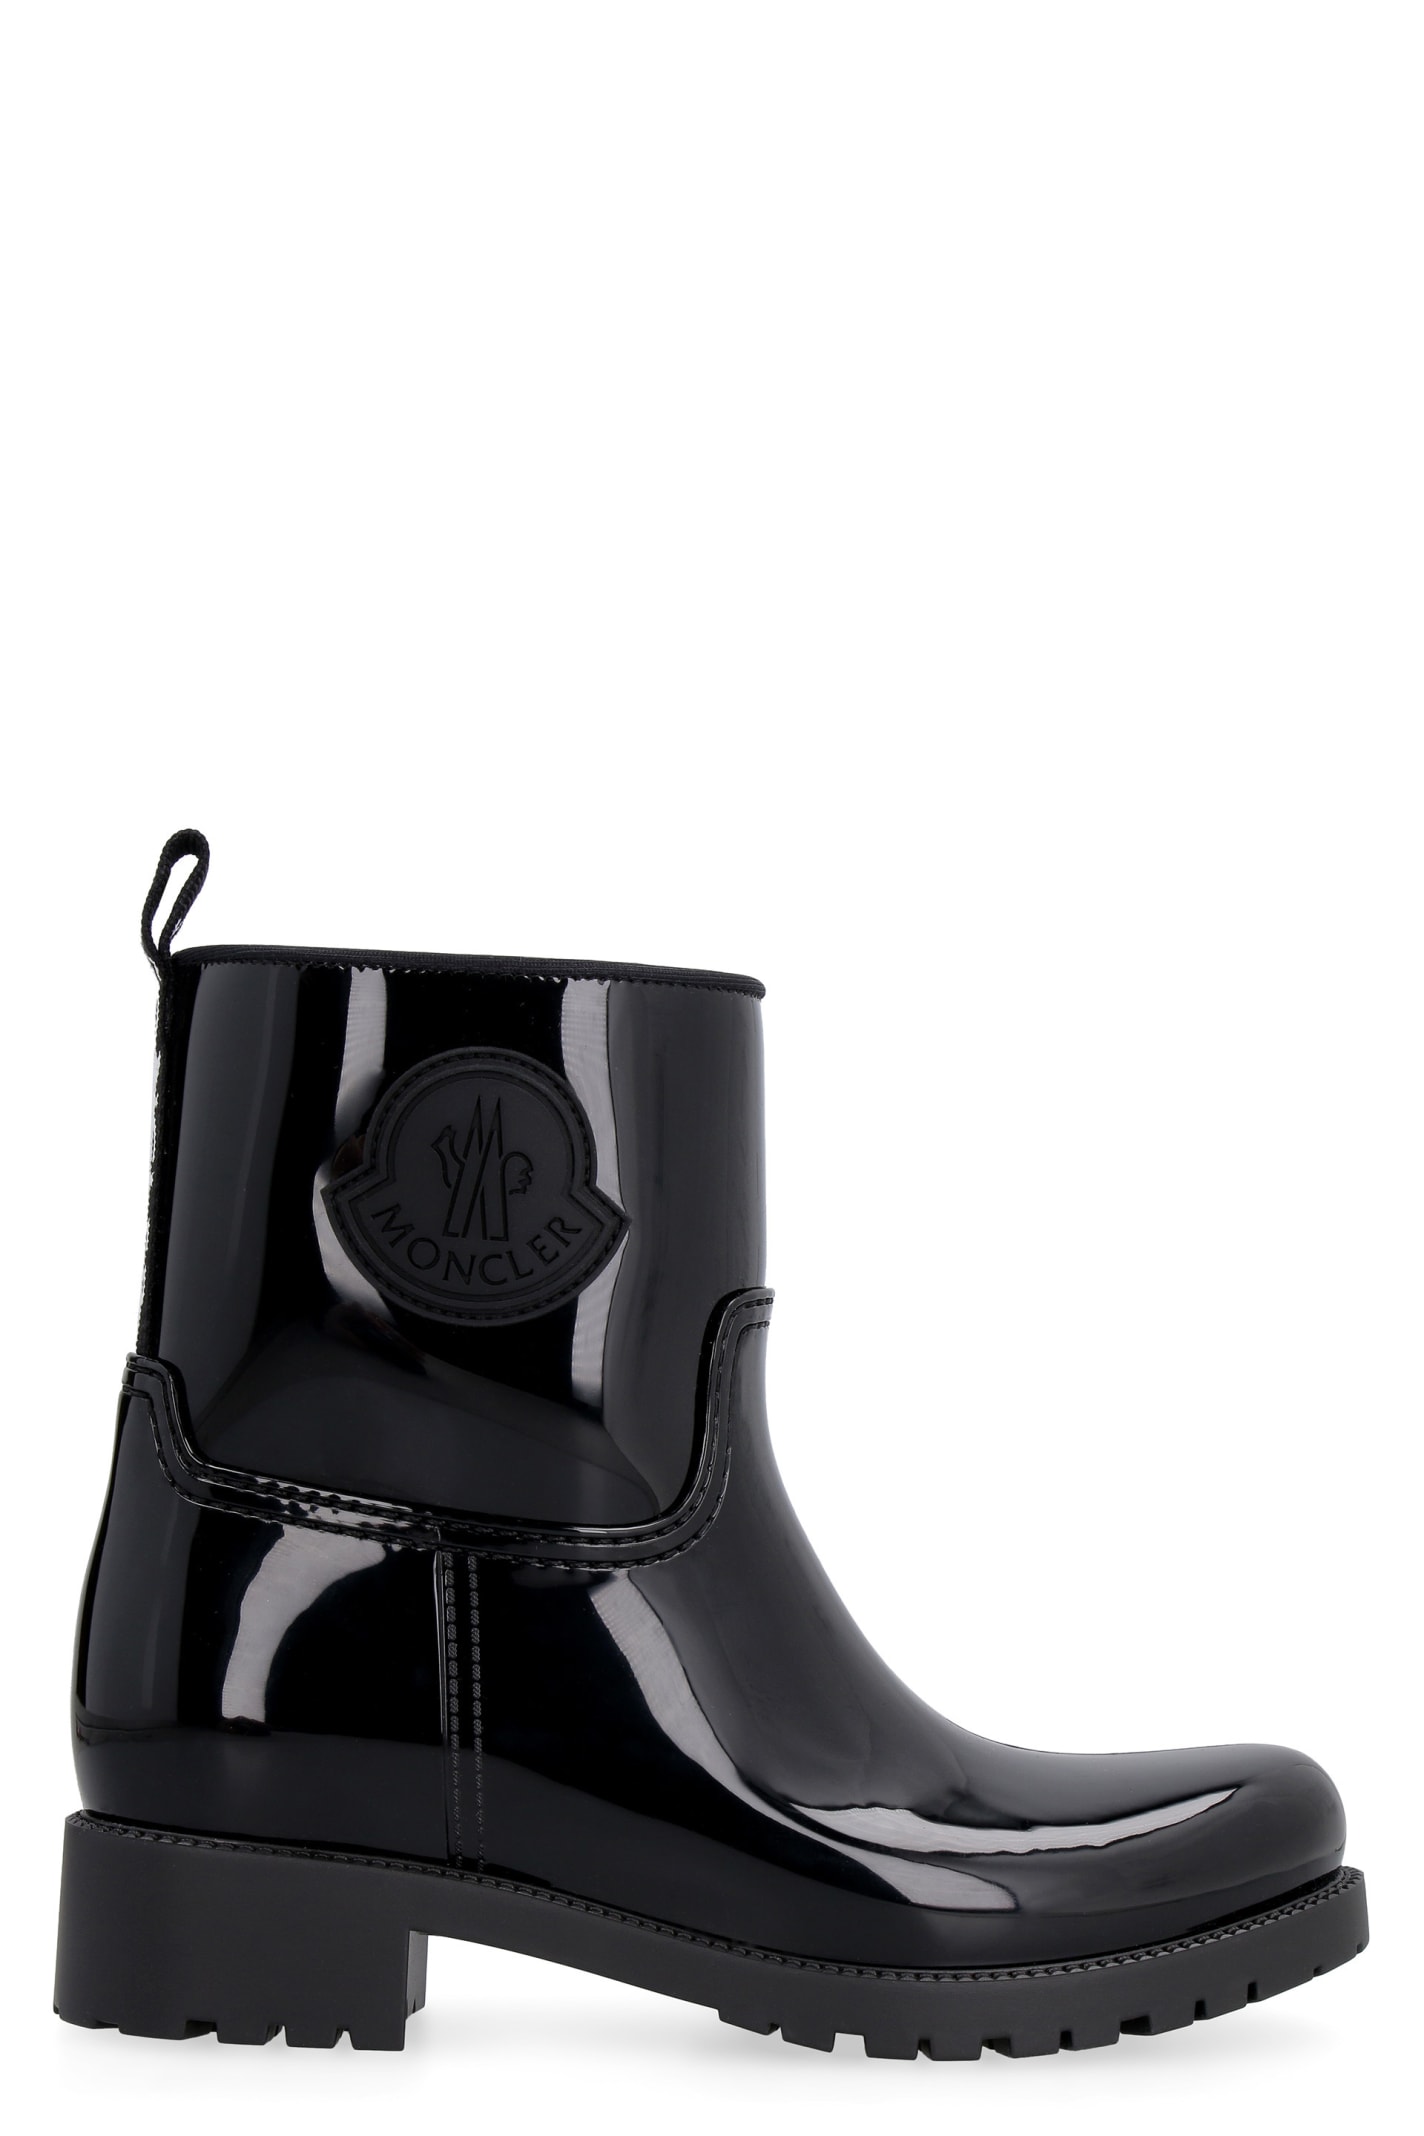 Moncler GINETTE RUBBER BOOTS